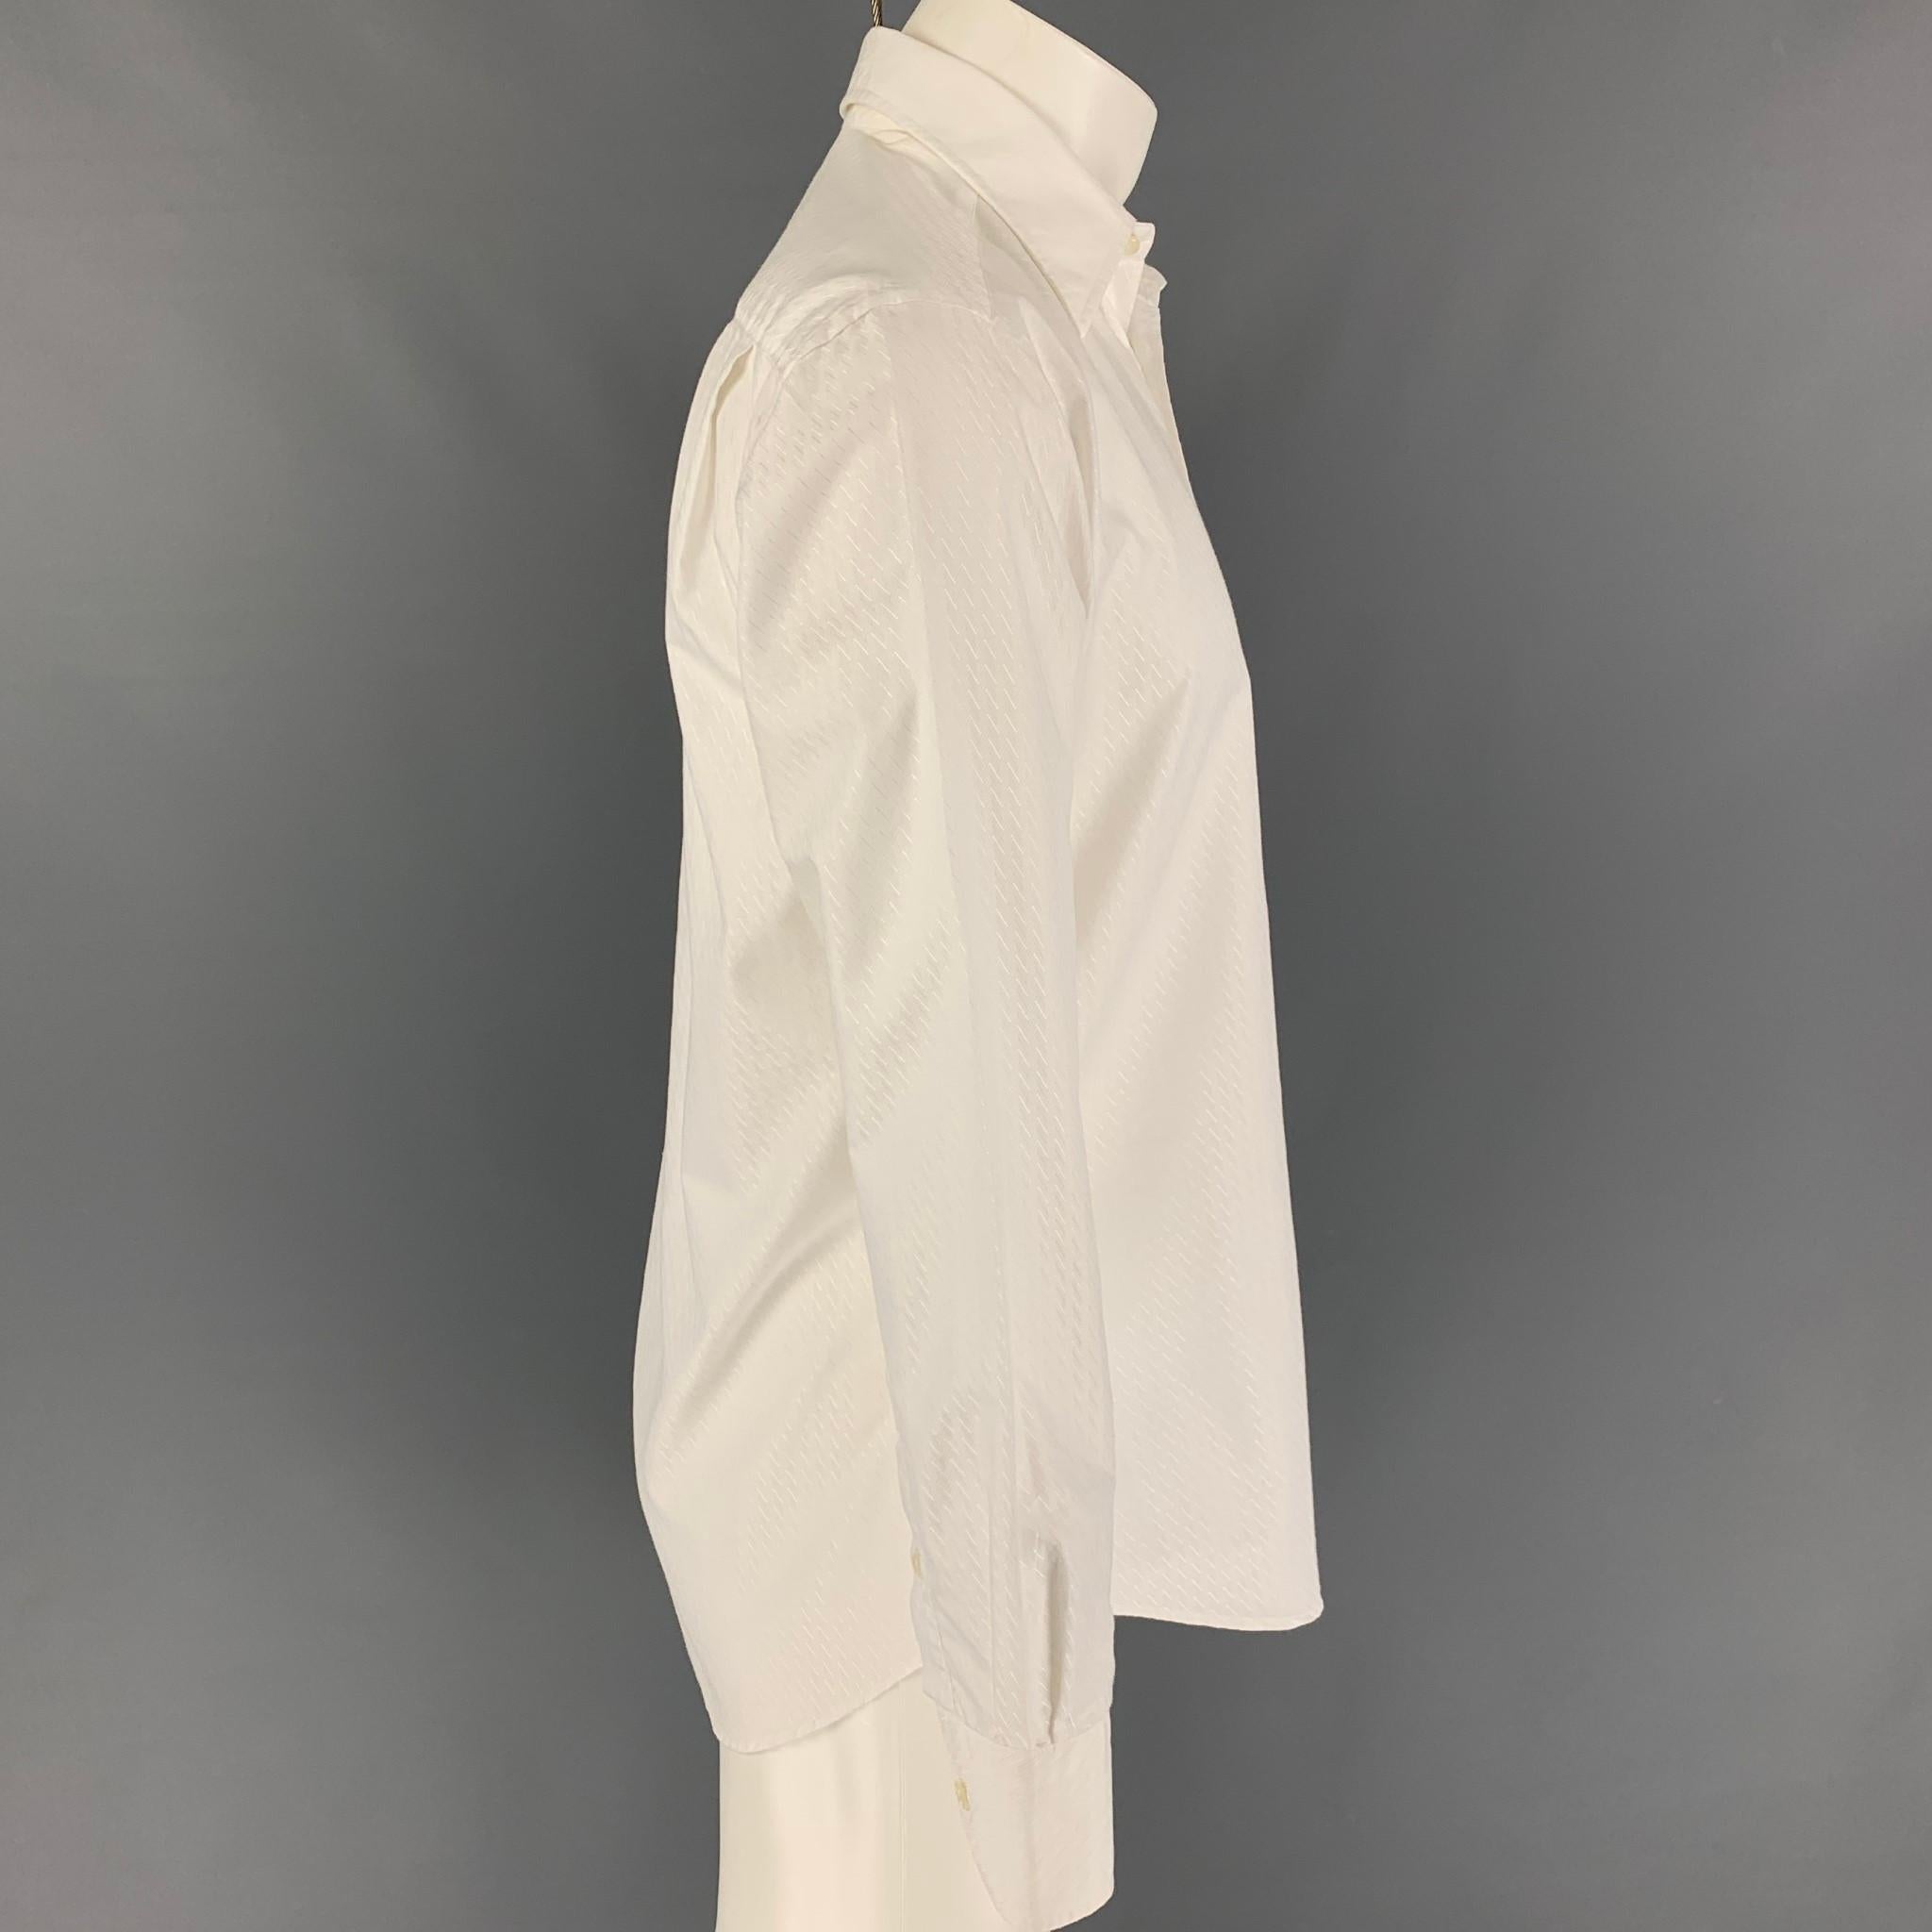 VERSACE COLLECTION 'City' long sleeve shirt comes in white textured cotton featuring a pointed collar and a button up closure. Made in Romania. 

Very Good Pre-Owned Condition.
Marked: 15.5/39

Measurements:

Shoulder: 18.5 in.
Chest: 42 in.
Sleeve: